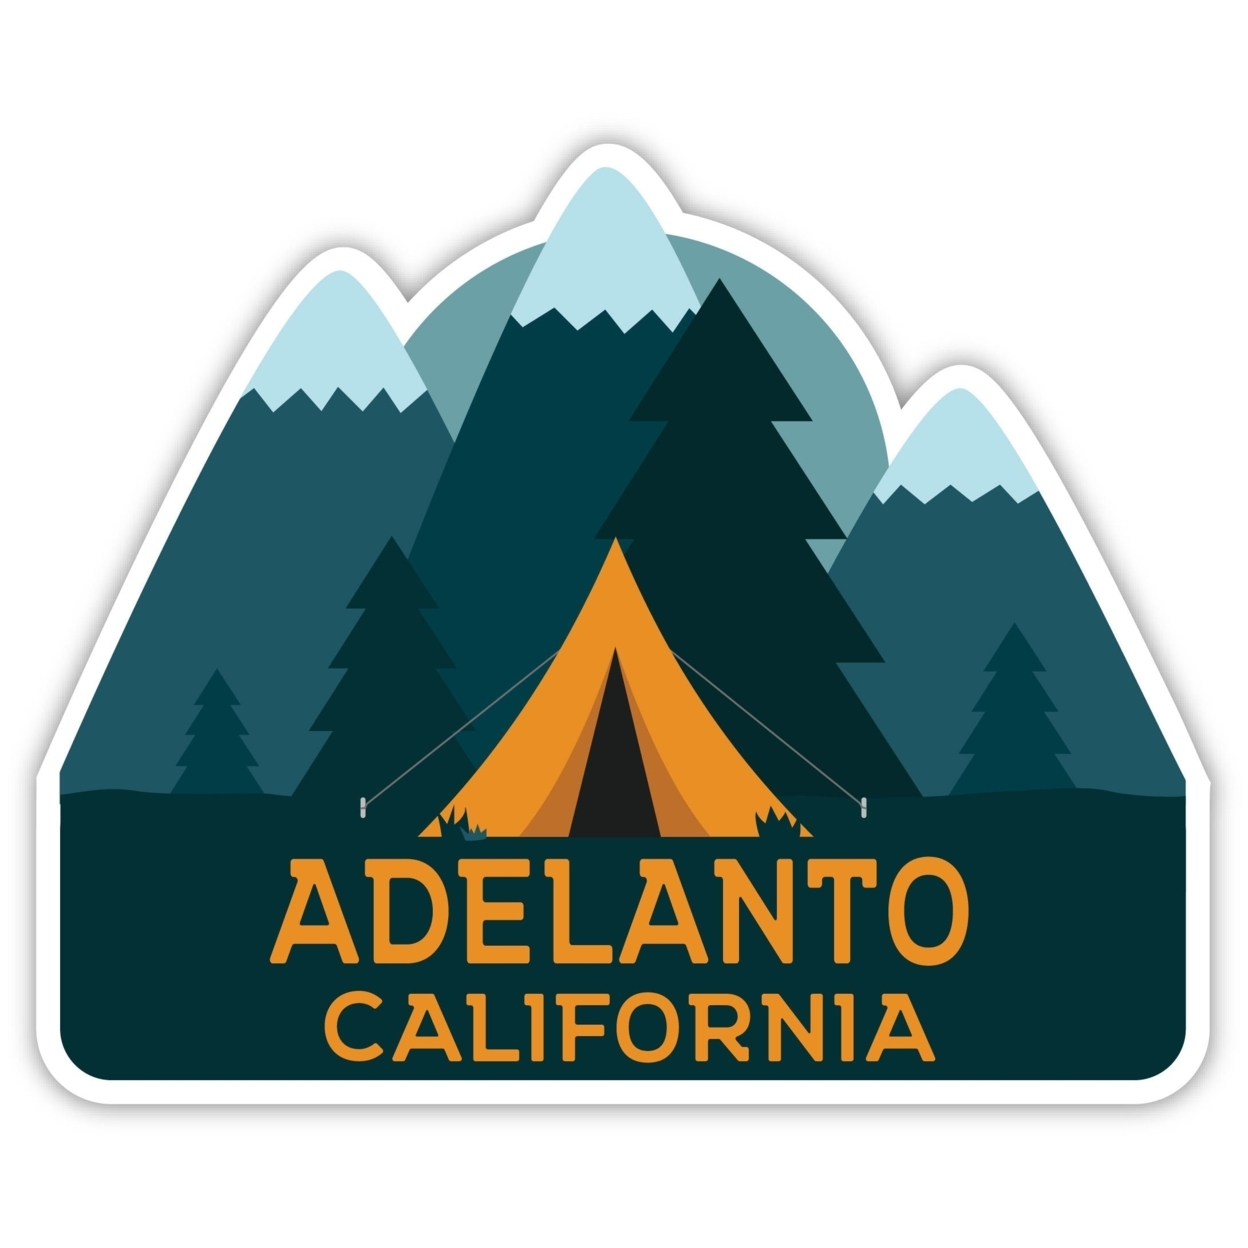 Adelanto California Souvenir Decorative Stickers (Choose Theme And Size) - 4-Pack, 8-Inch, Tent